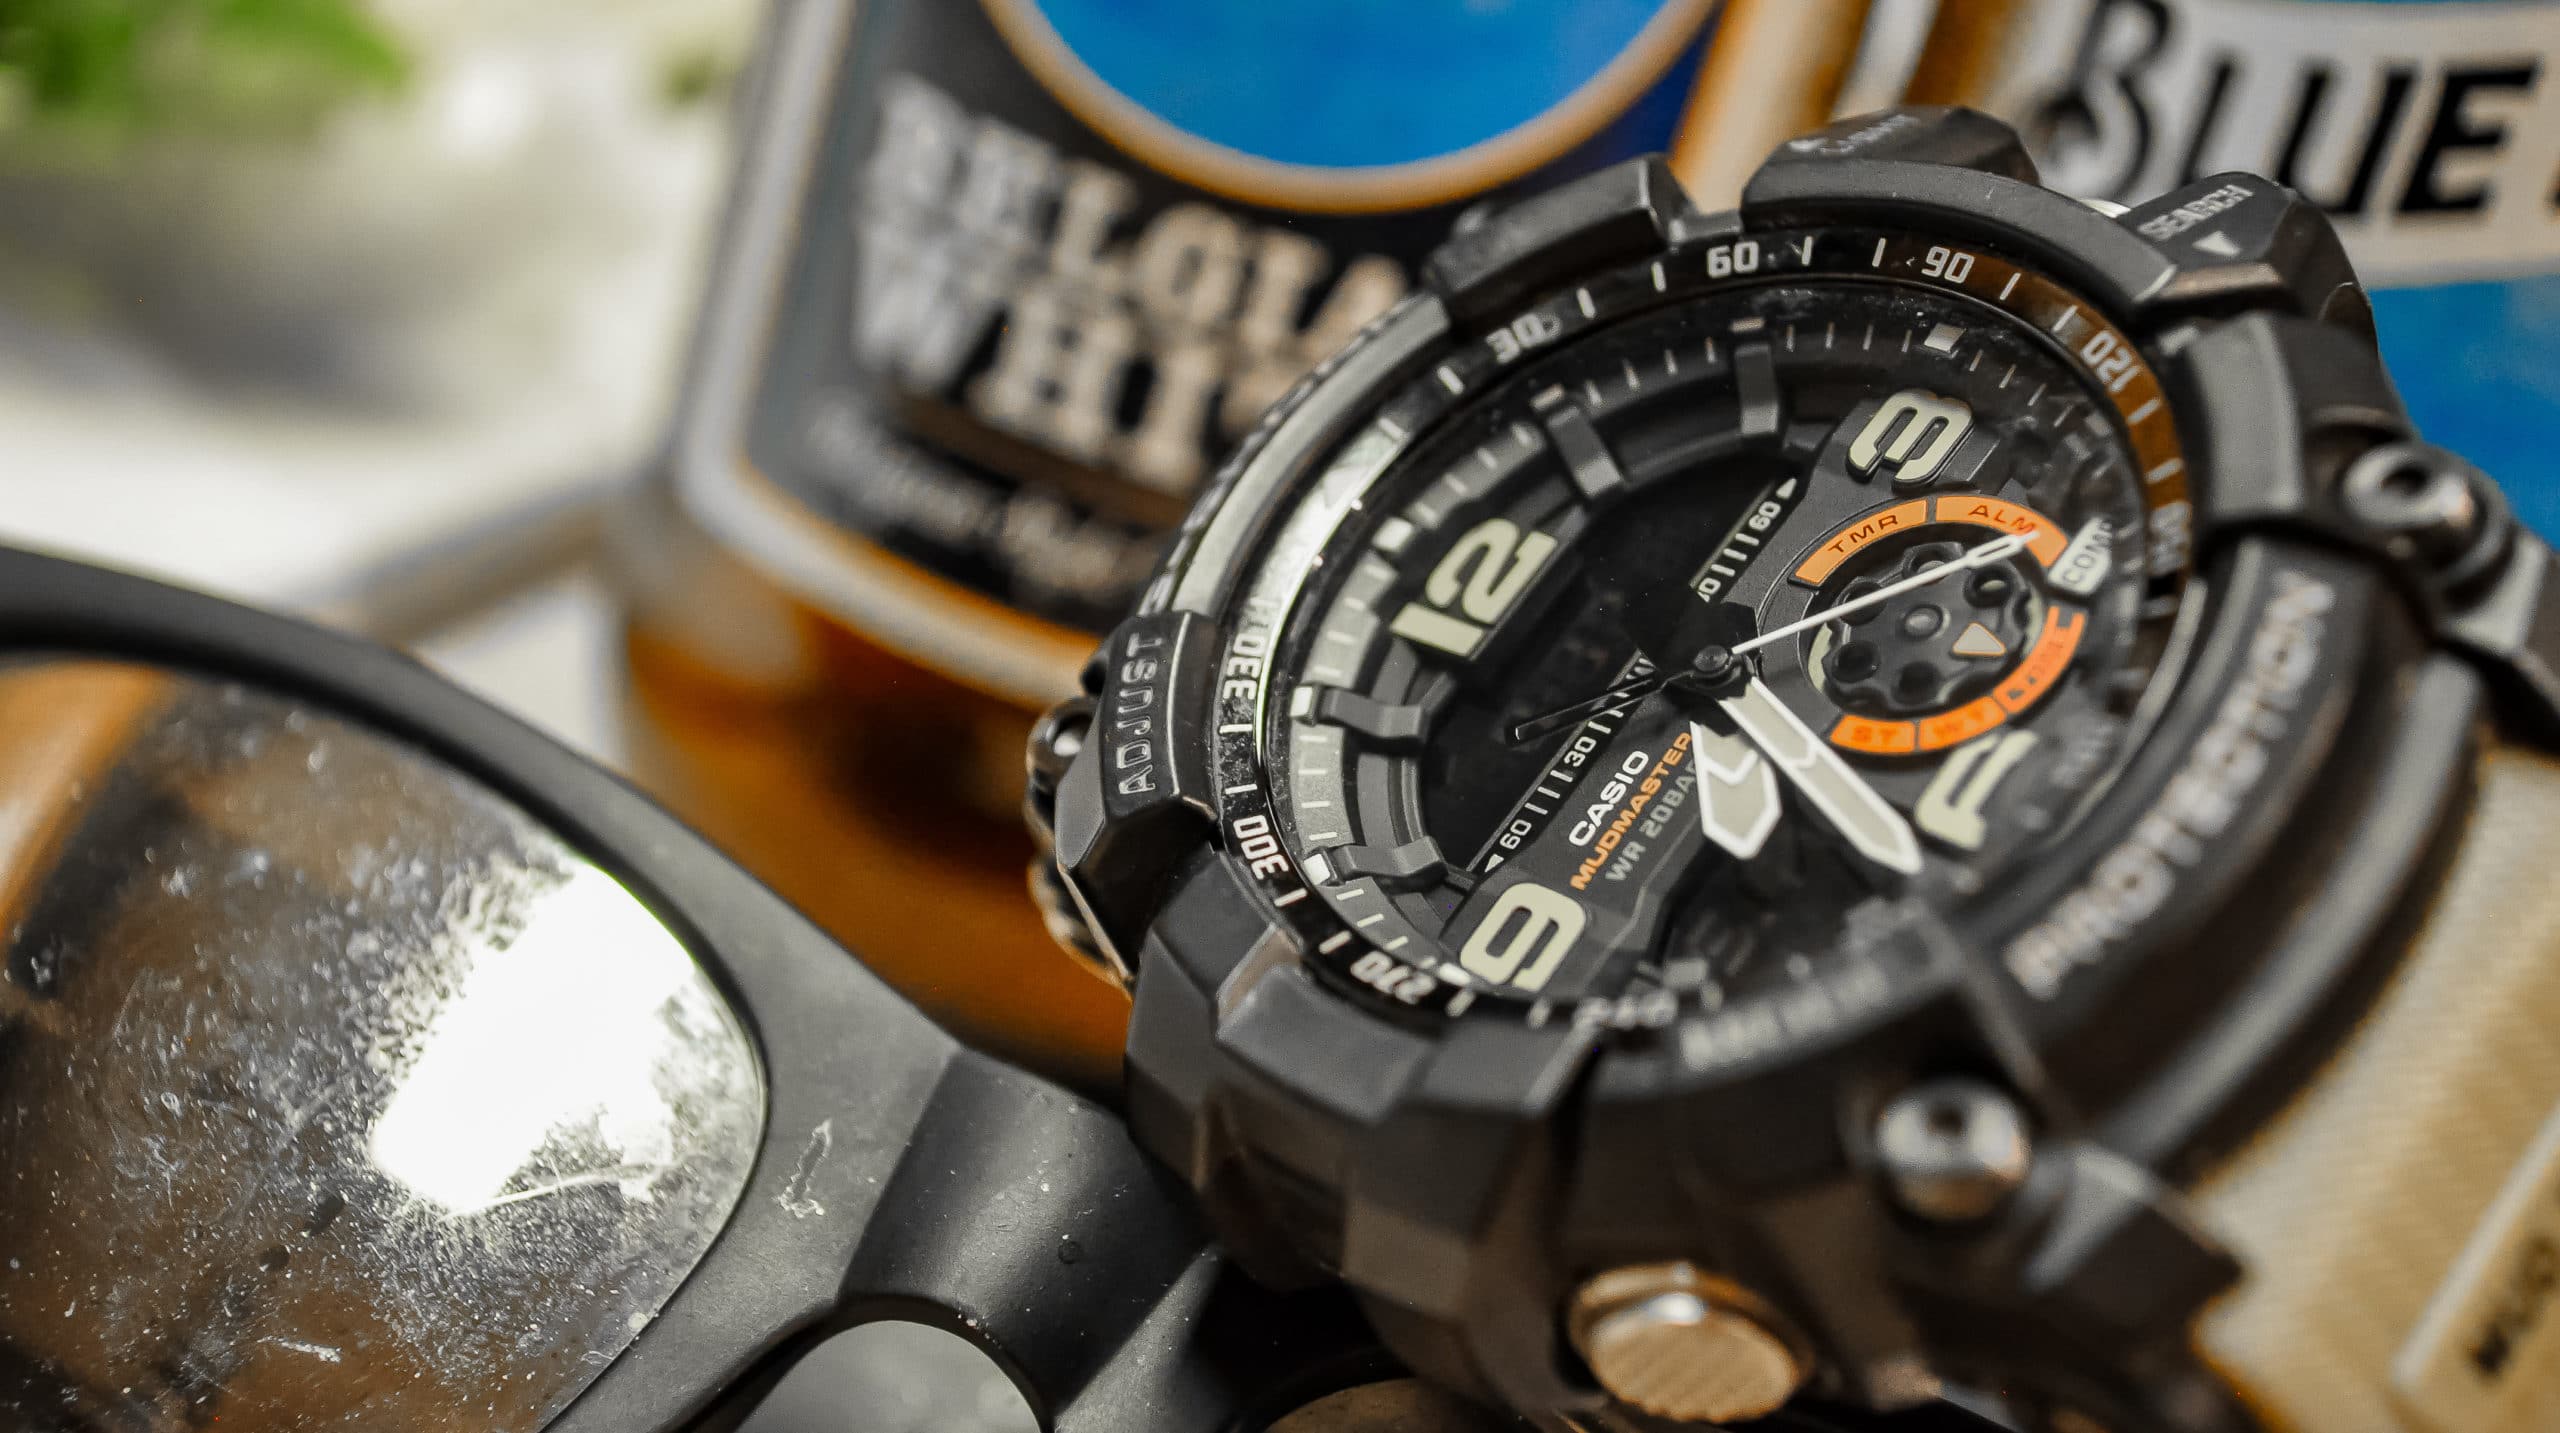 Casio's new watch fixes what most people don't like about G-Shocks